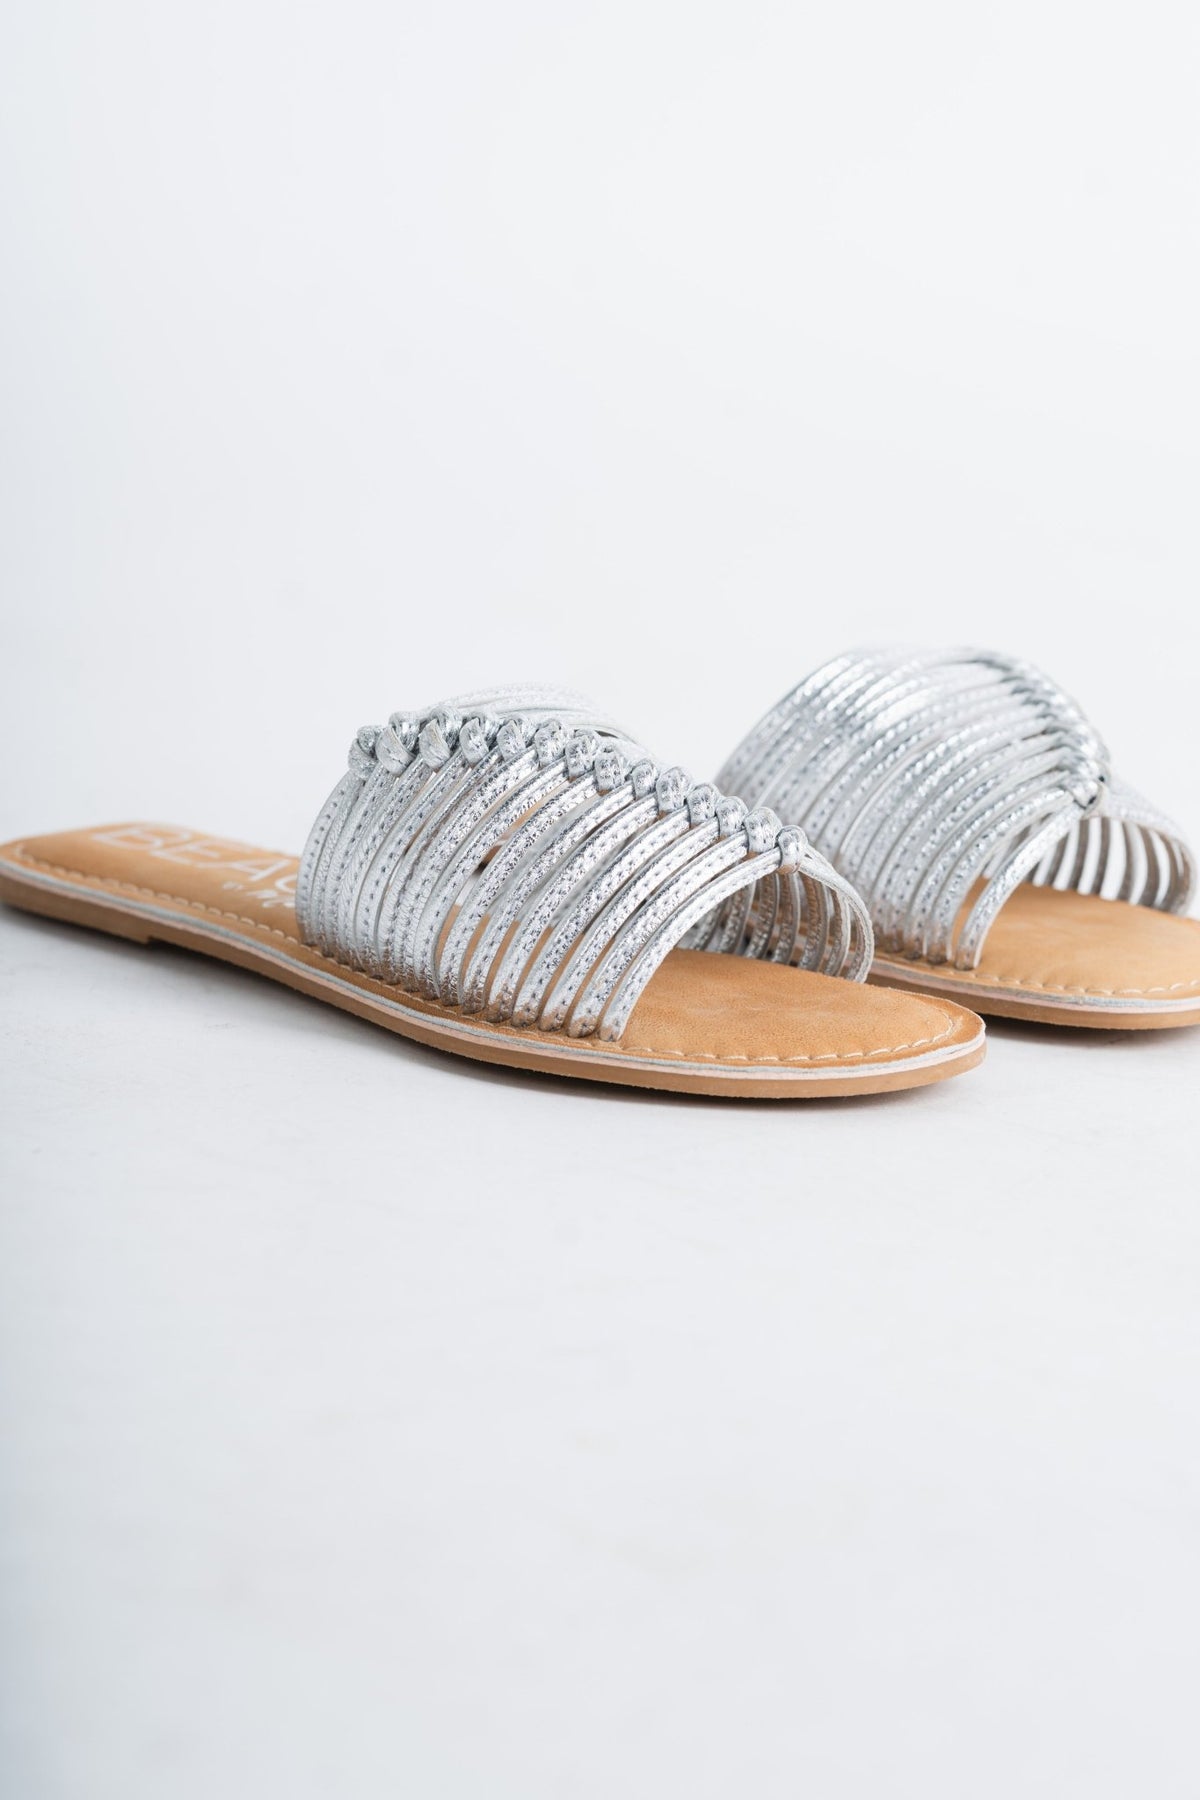 Baxter leather sandals silver - Cute shoes - Trendy Shoes at Lush Fashion Lounge Boutique in Oklahoma City